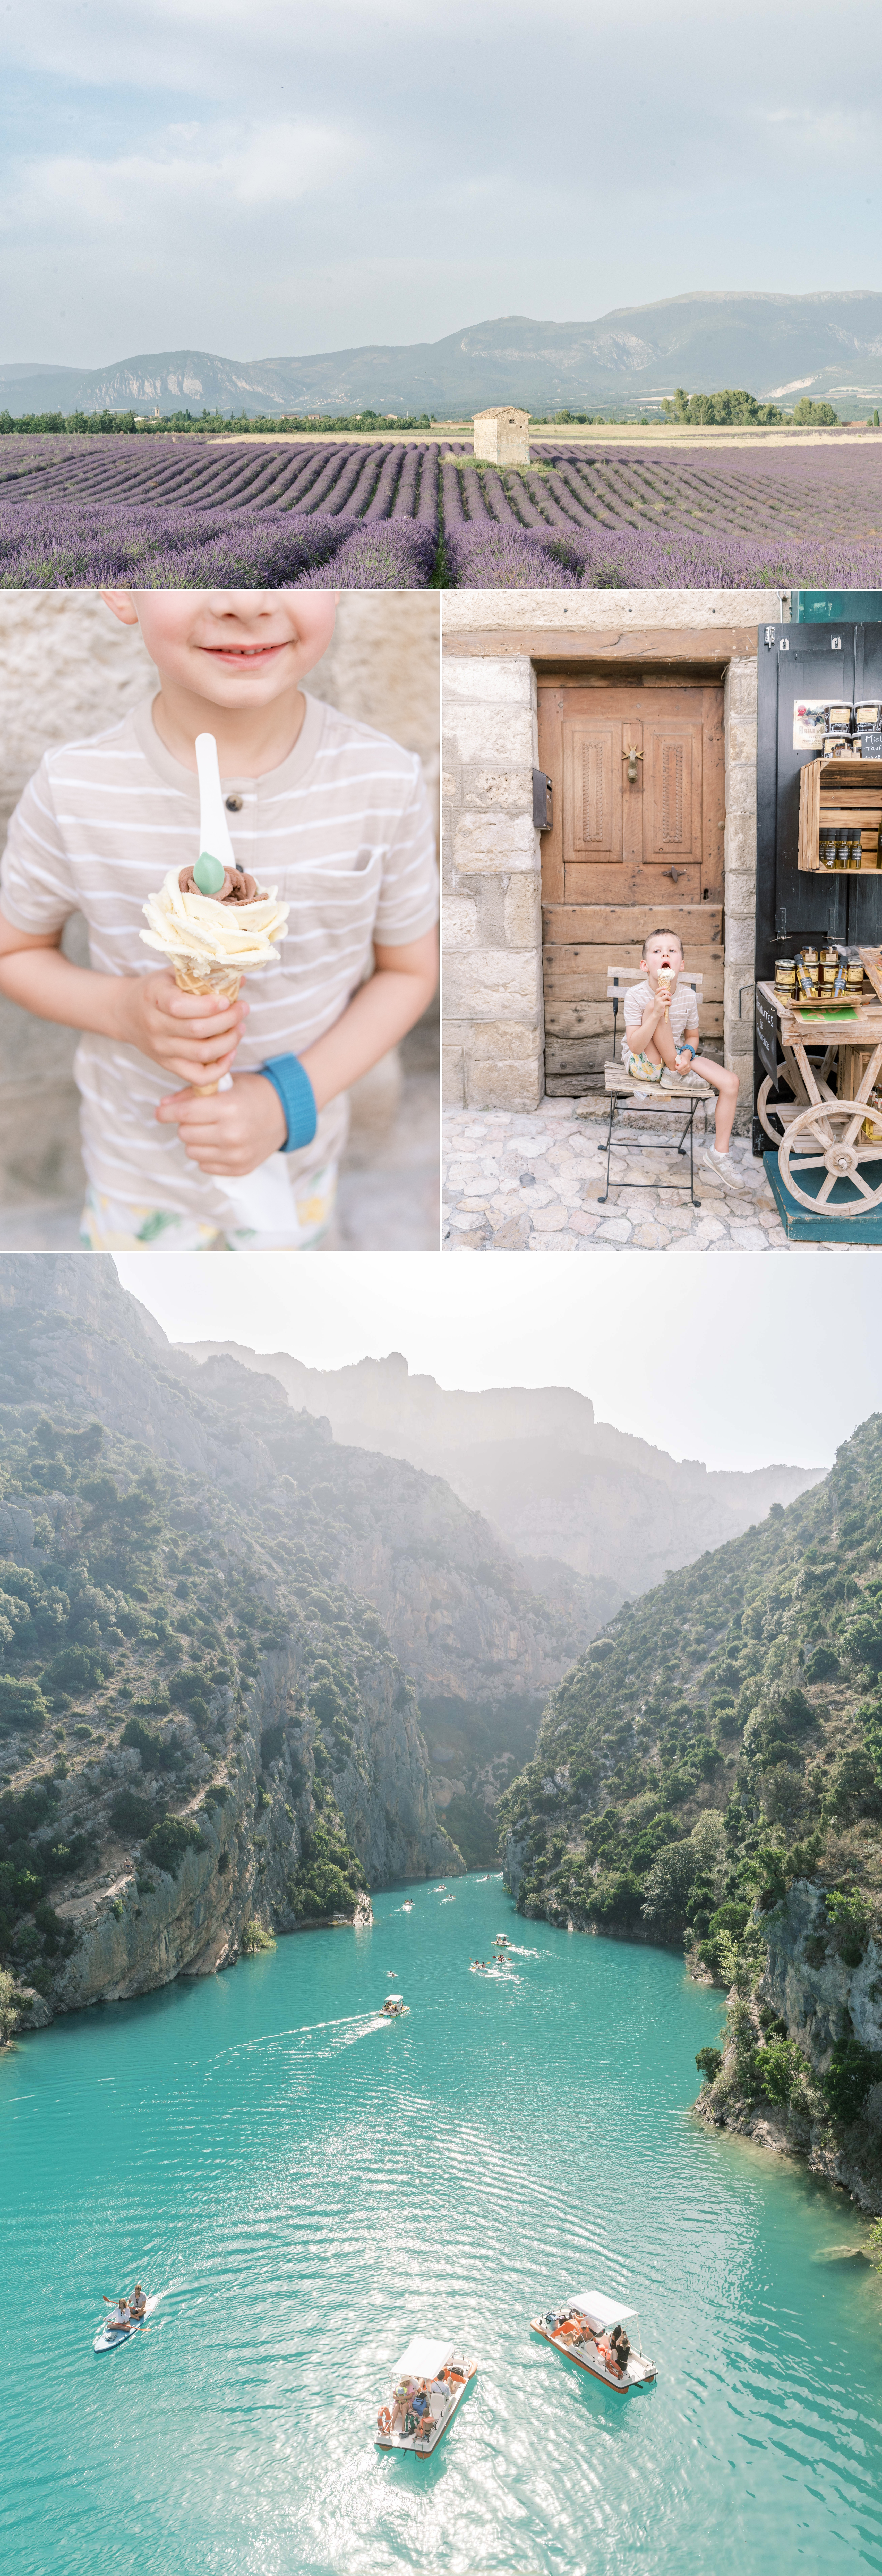 Gorgeous travel photography from a recent trip to France, including stops in both Provence for lavender season and Paris.